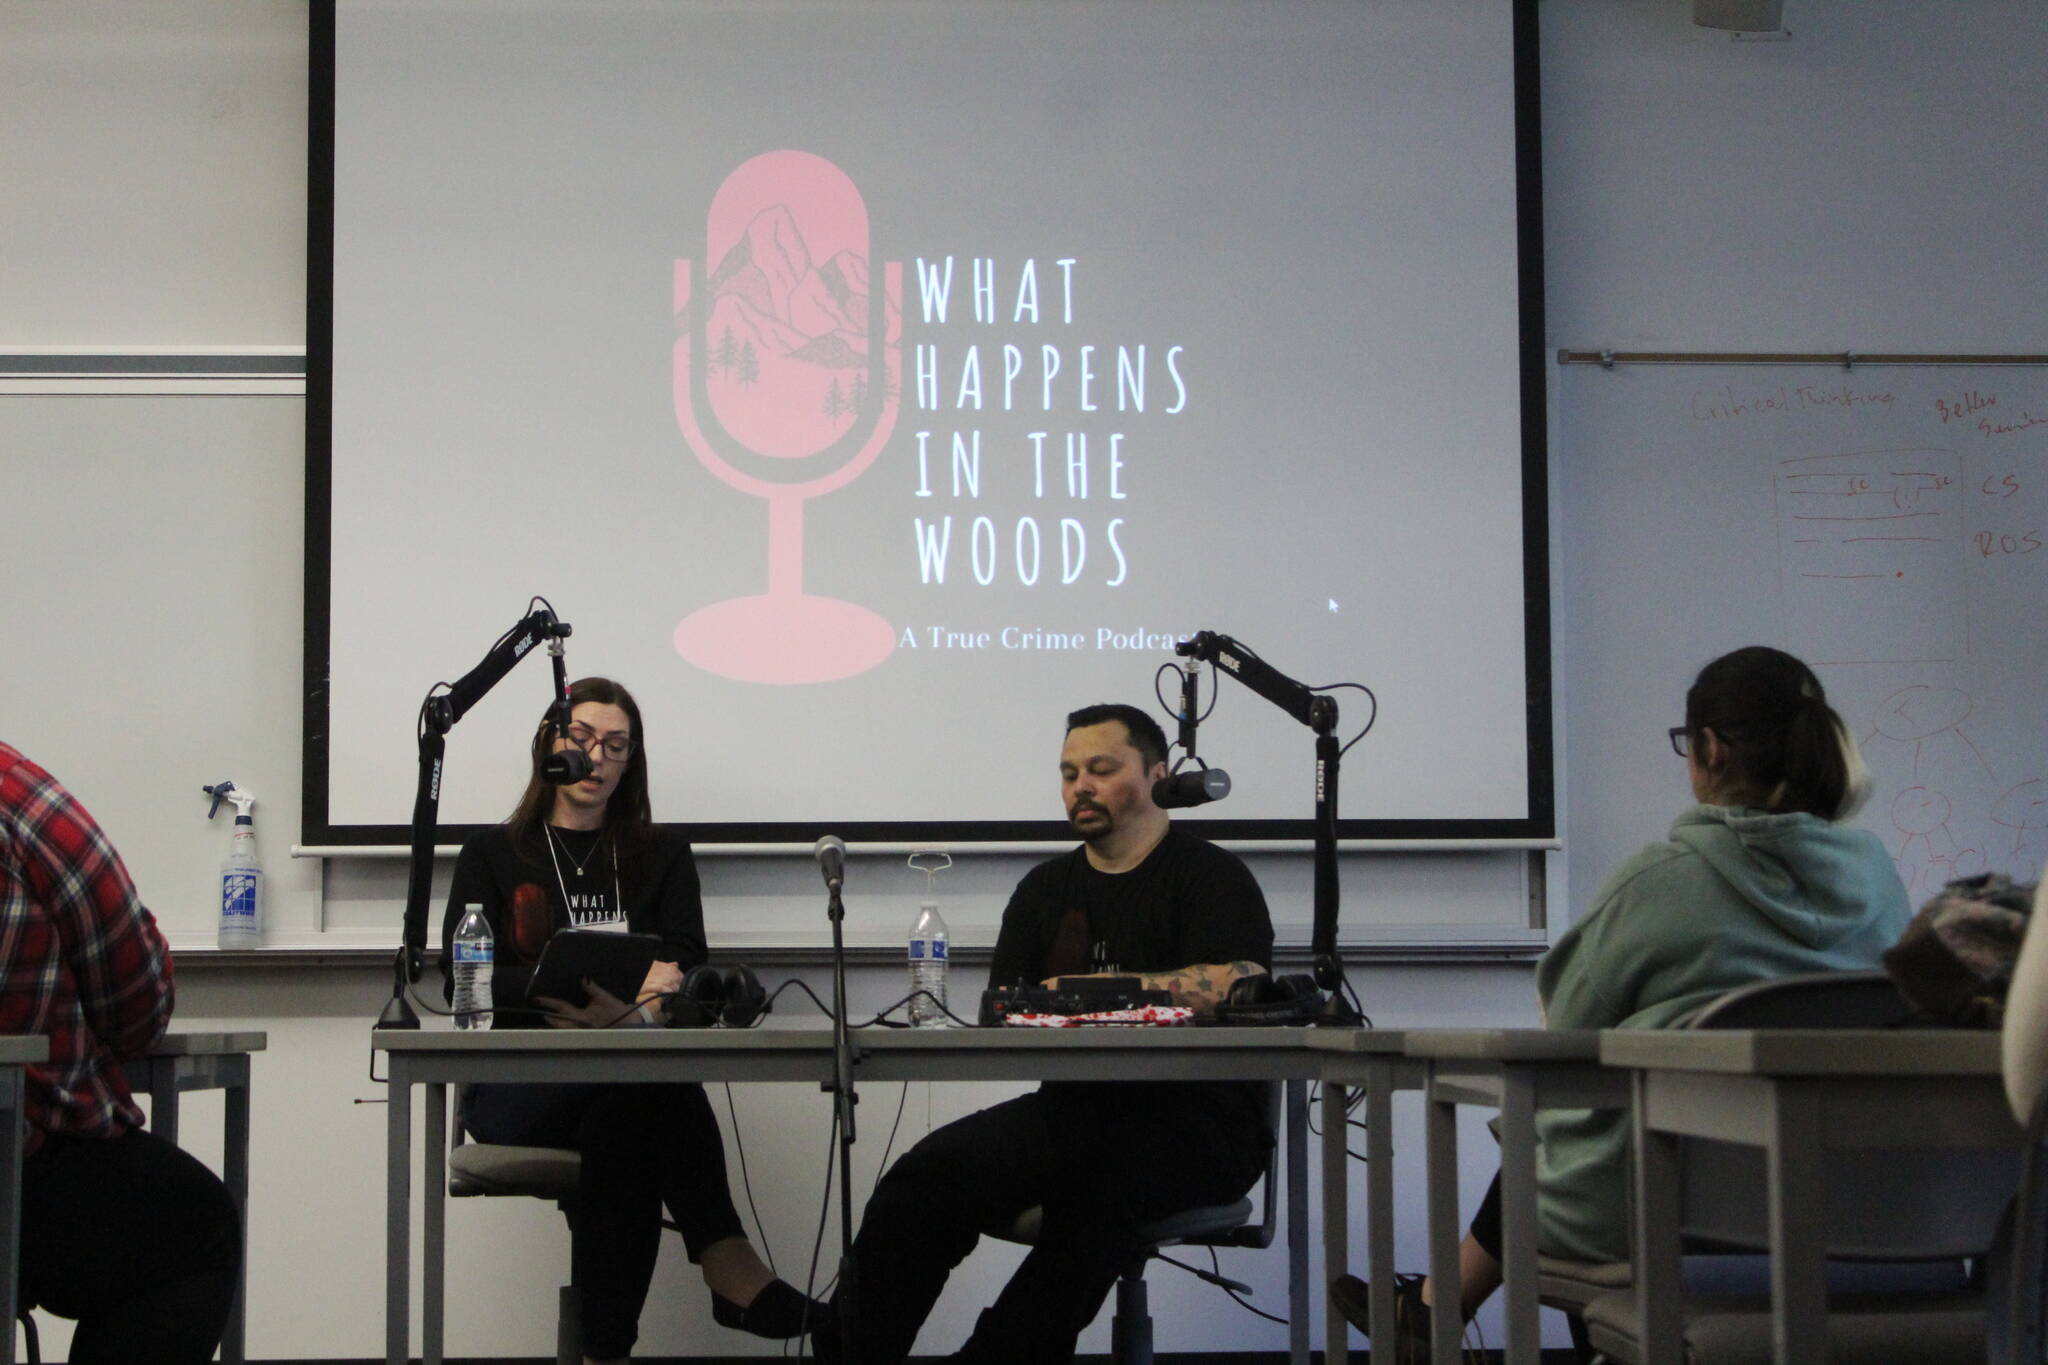 Co-hosts Jess and Brice of “What Happens In The Woods” recorded a live podcast episode about “The Jungle,” a homeless encampment in Seattle. Photo by Bailey Jo Josie/Sound Publishing.